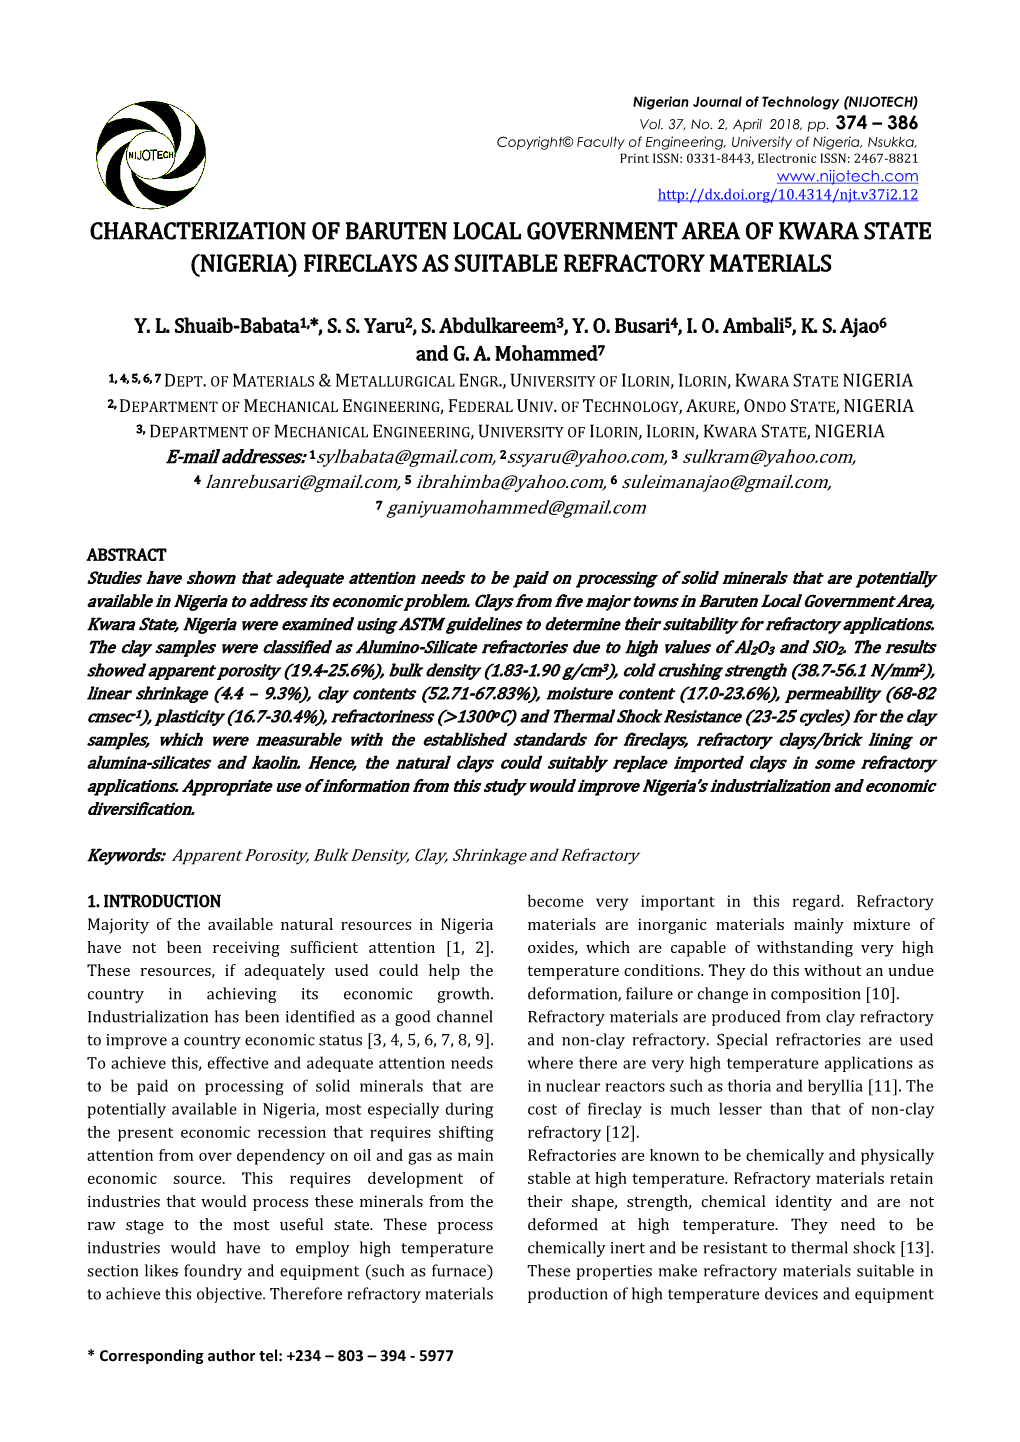 Characterization of Baruten Local Government Area of Kwara State (Nigeria) Fireclays As Suitable Refractory Materials